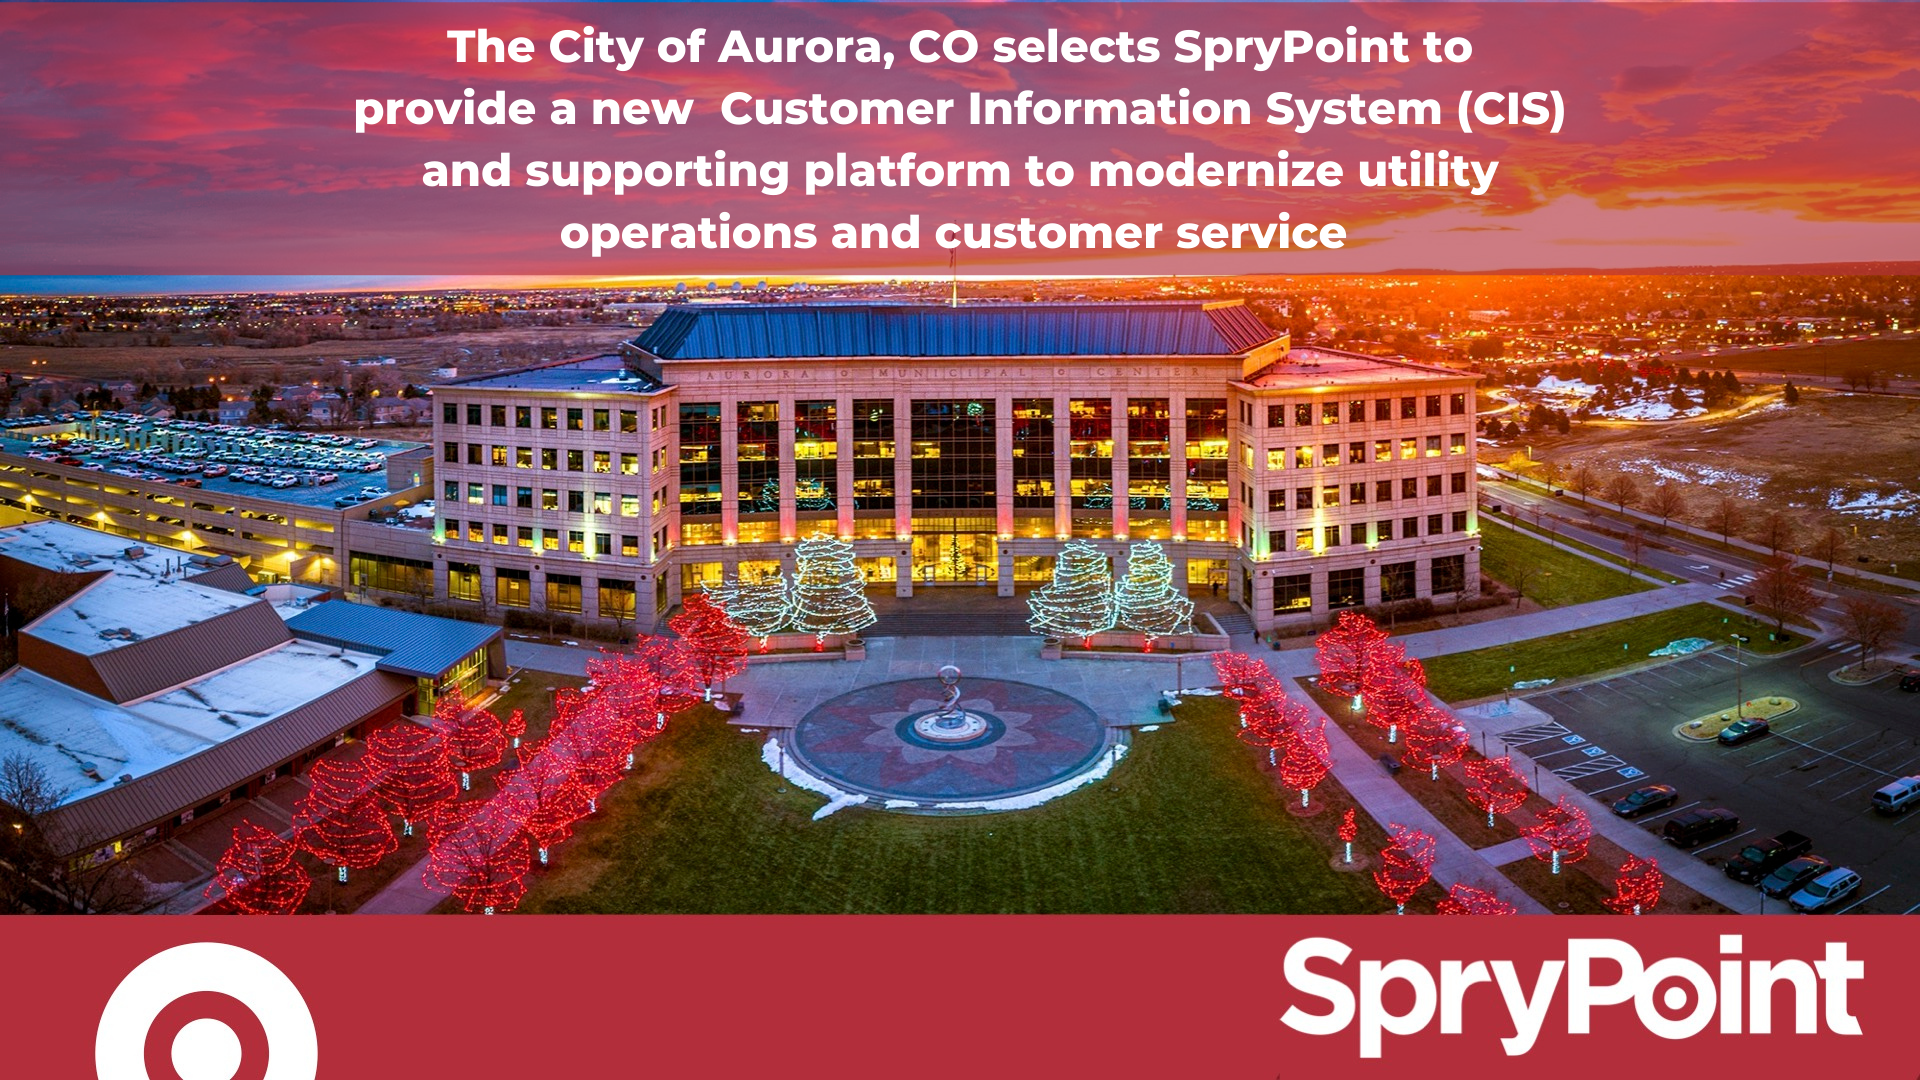 The City of Aurora, CO selects SpryPoint to provide a new Customer Information System (CIS) and supporting platform to modernize utility operations and customer service